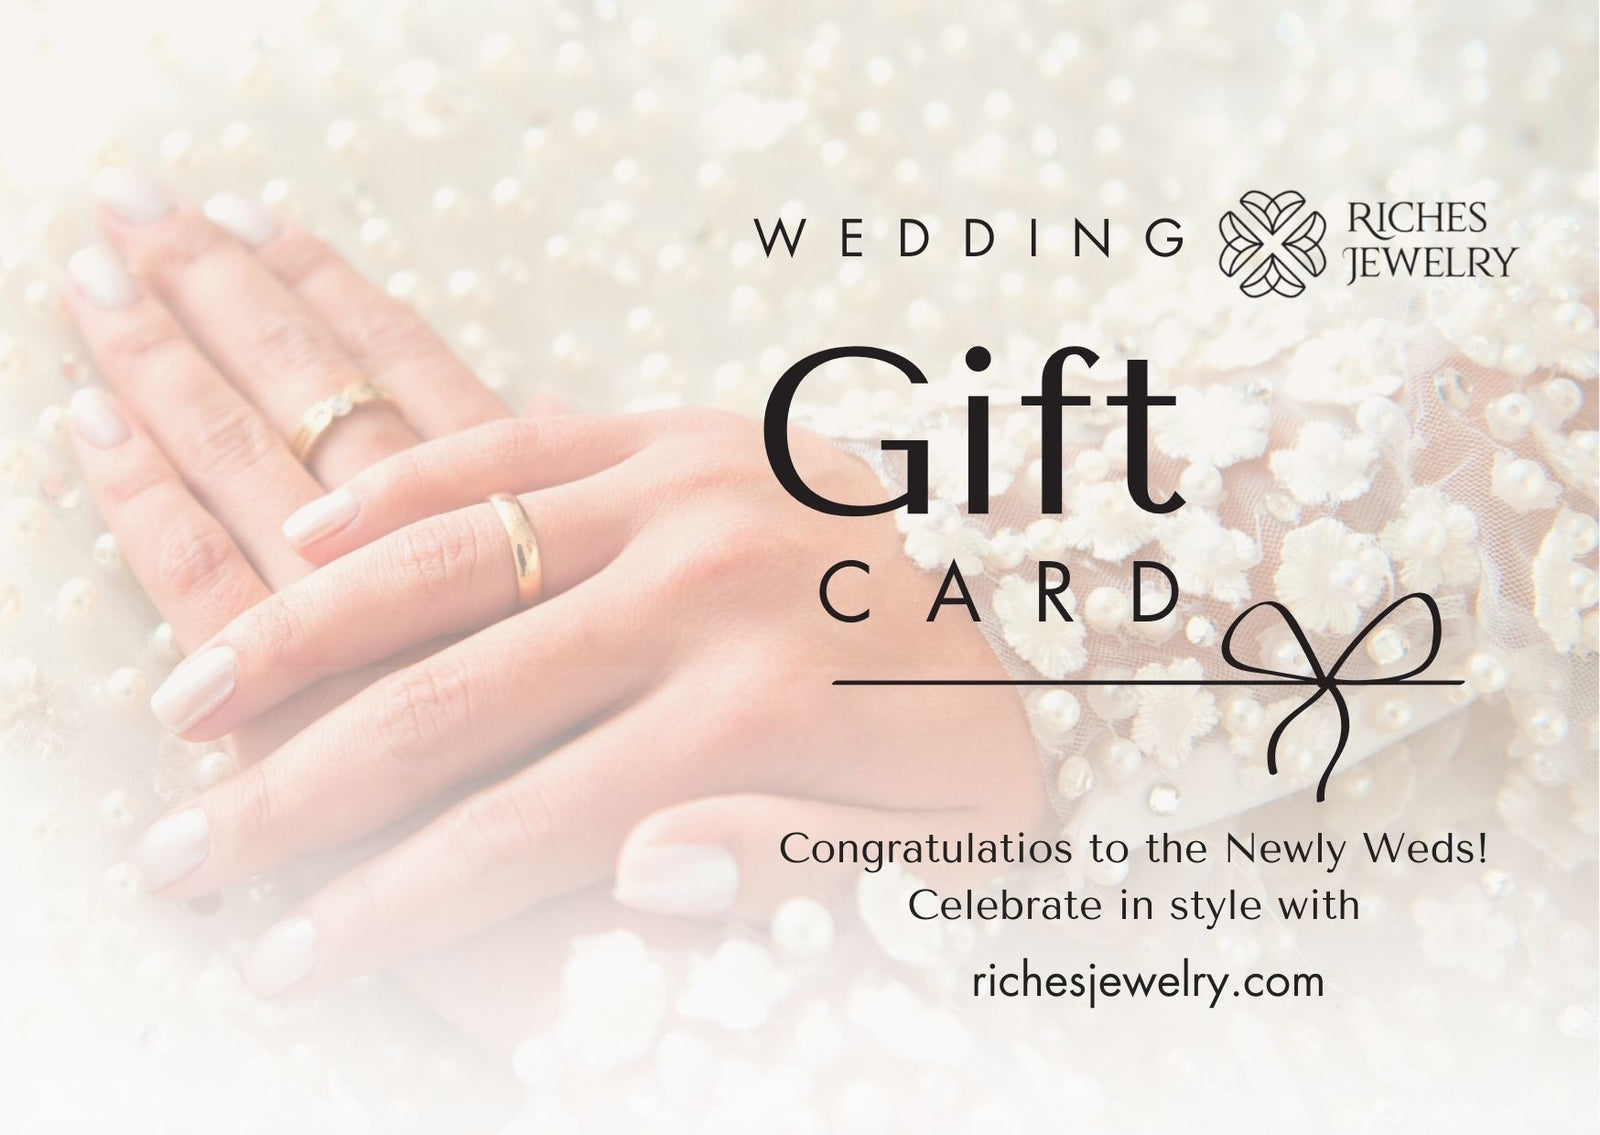 Gift Card by Riches Jewelry